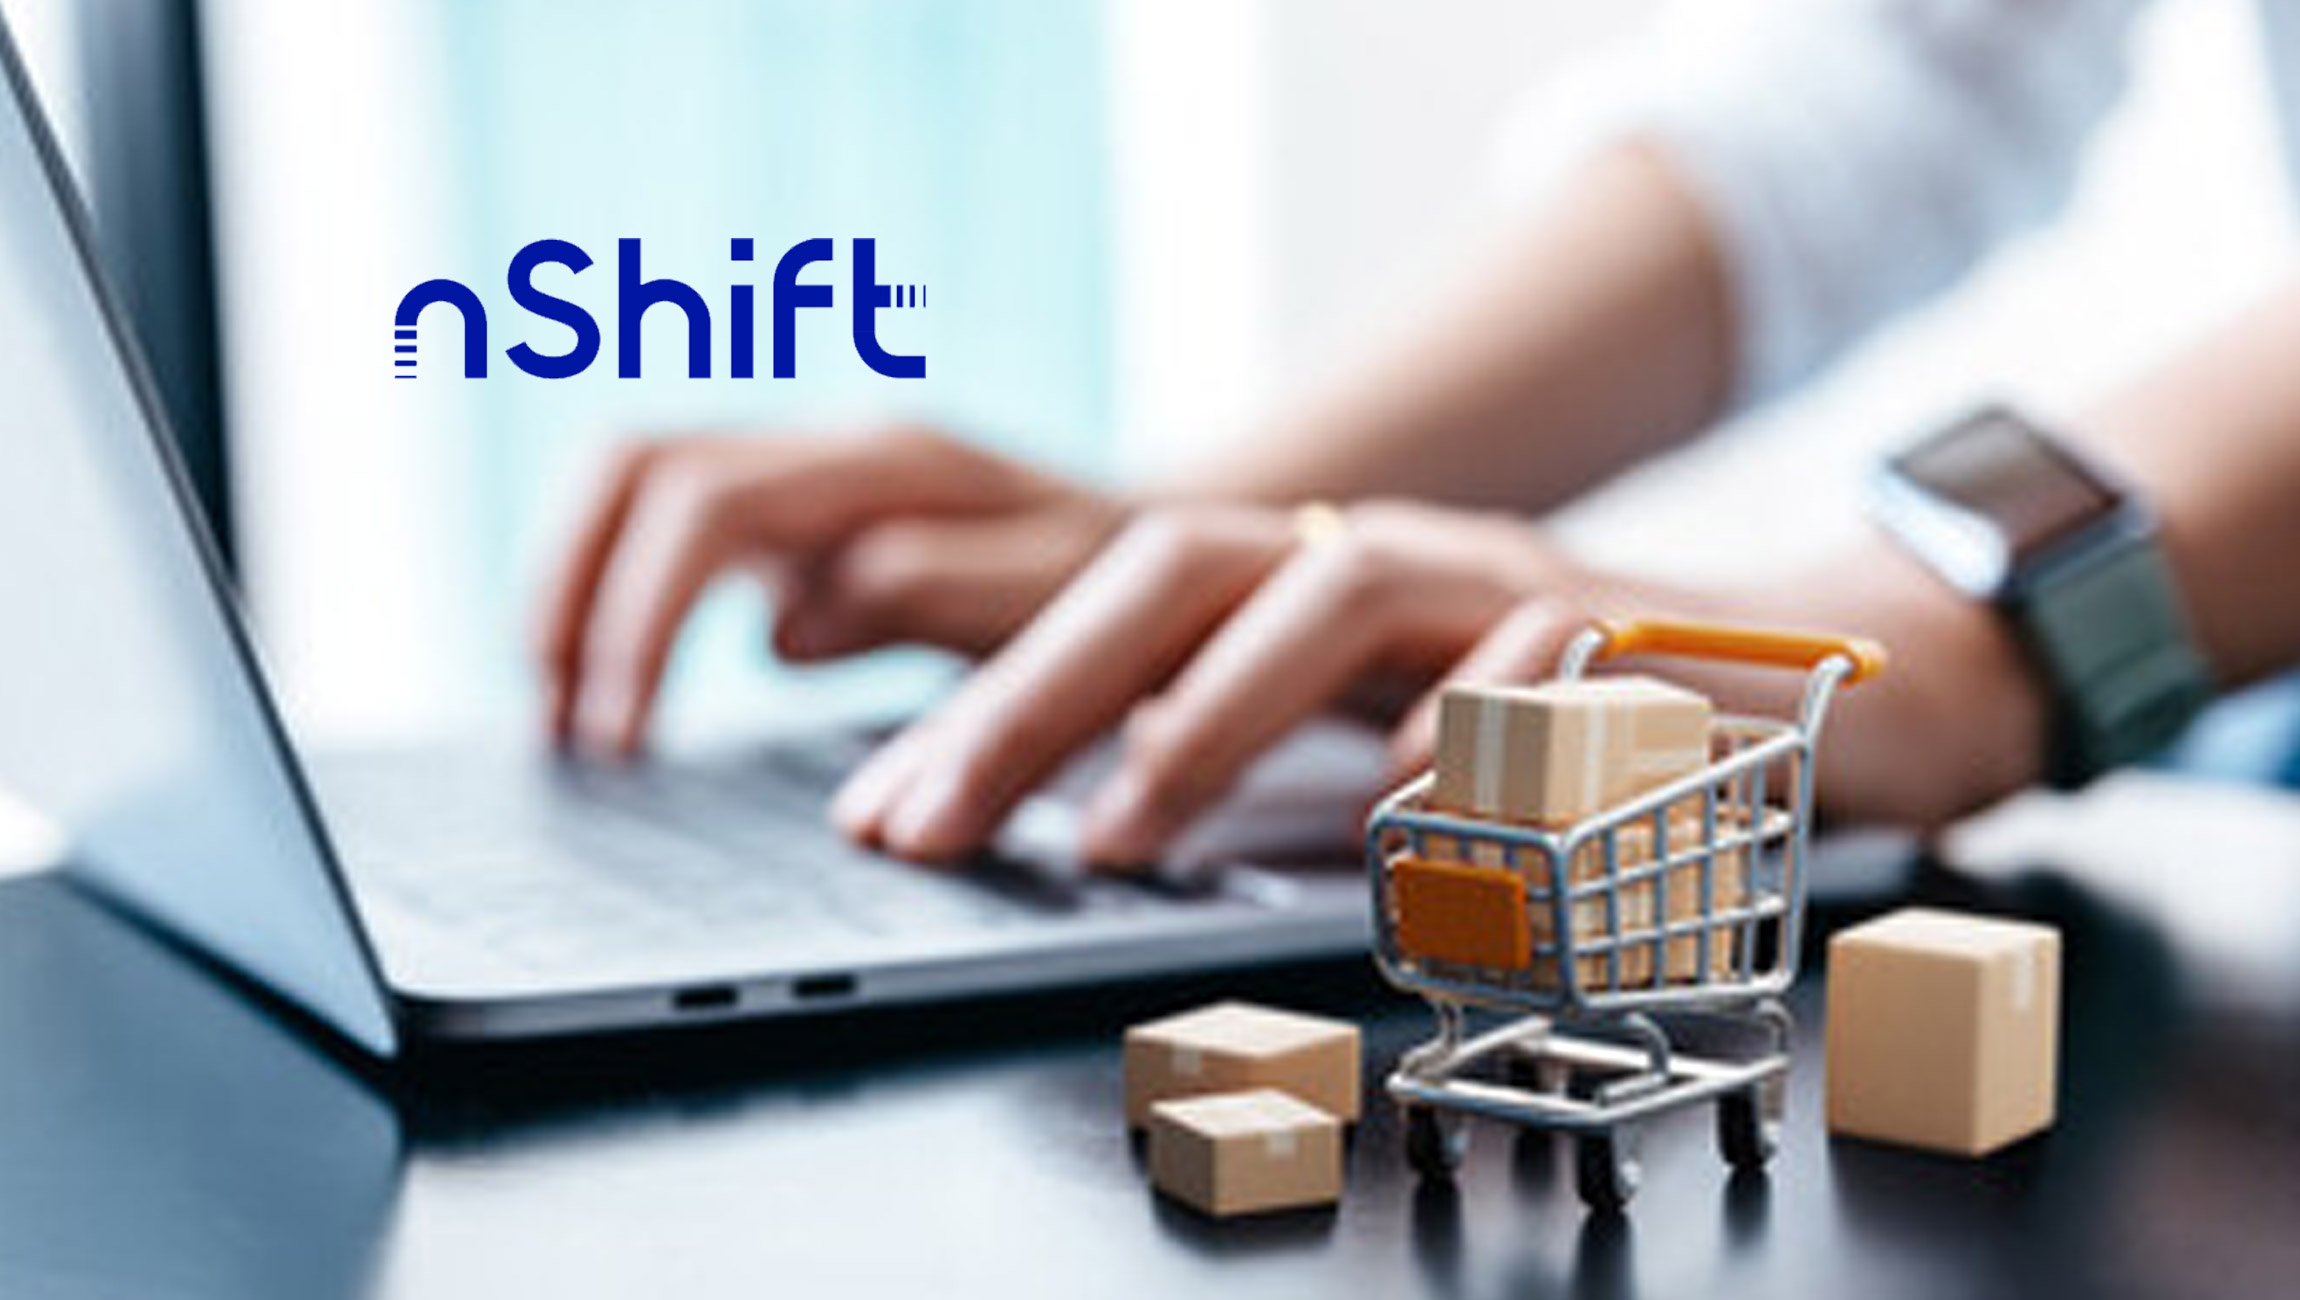 nShift: Disjointed Delivery Processes Multiply Retail Risks